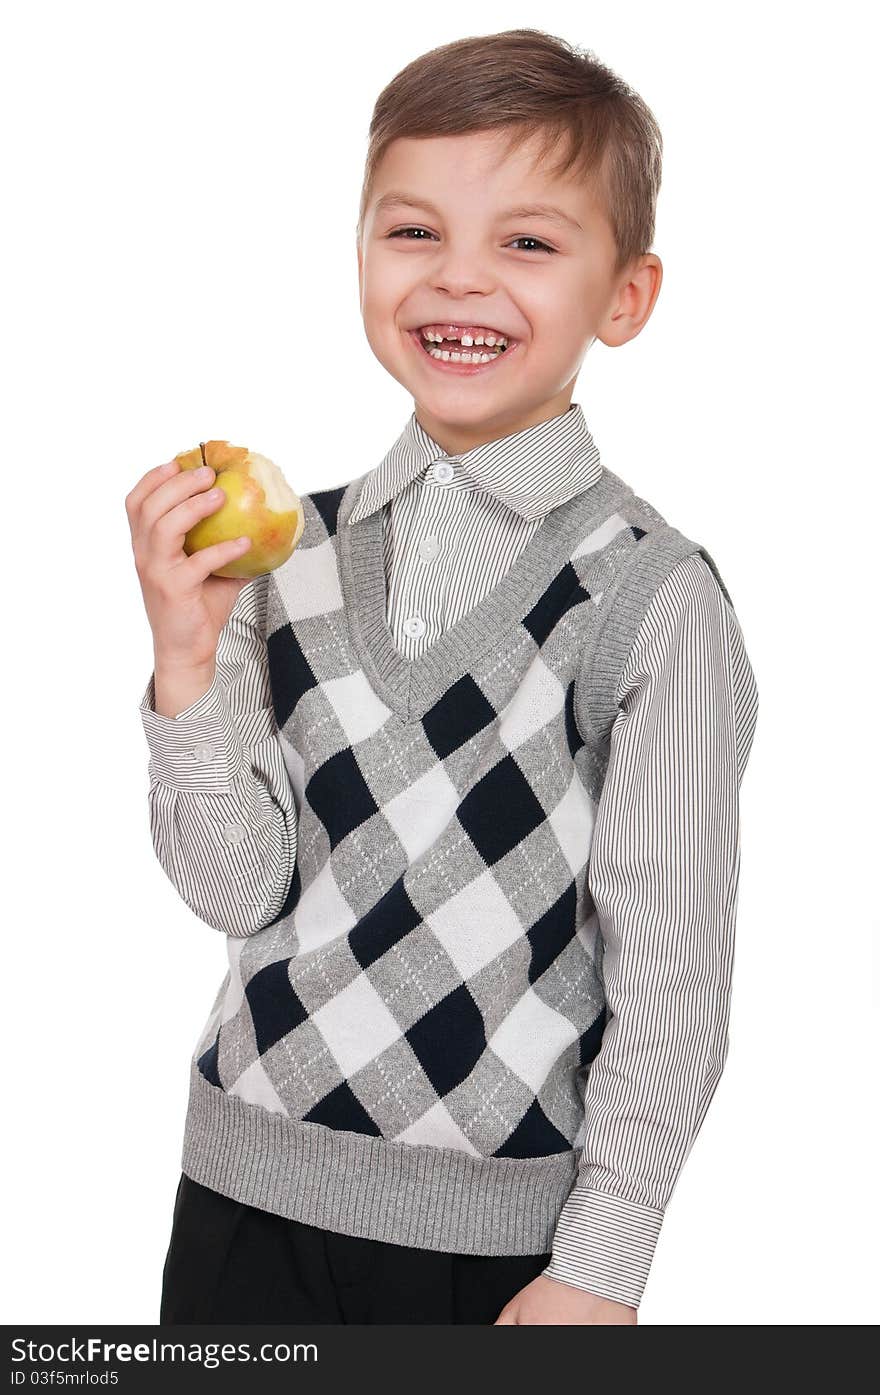 Little boy with apple. Isolated on white background.